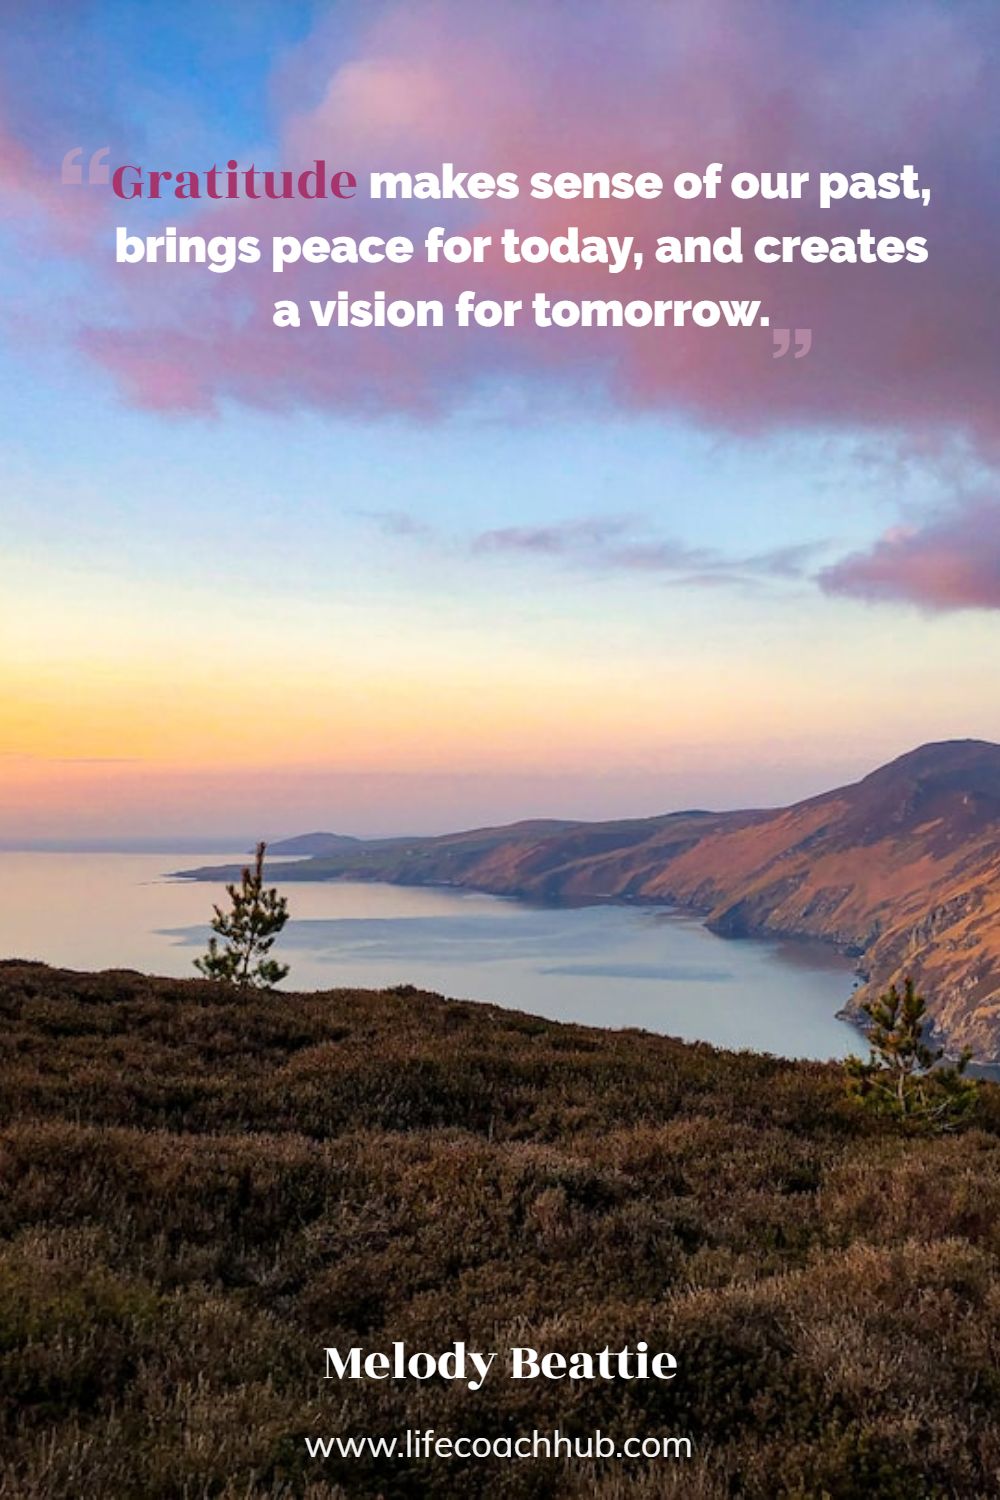 Gratitude makes sense of our past, brings peace for today, and creates a vision for tomorrow. Melody Beattie Coaching Quote